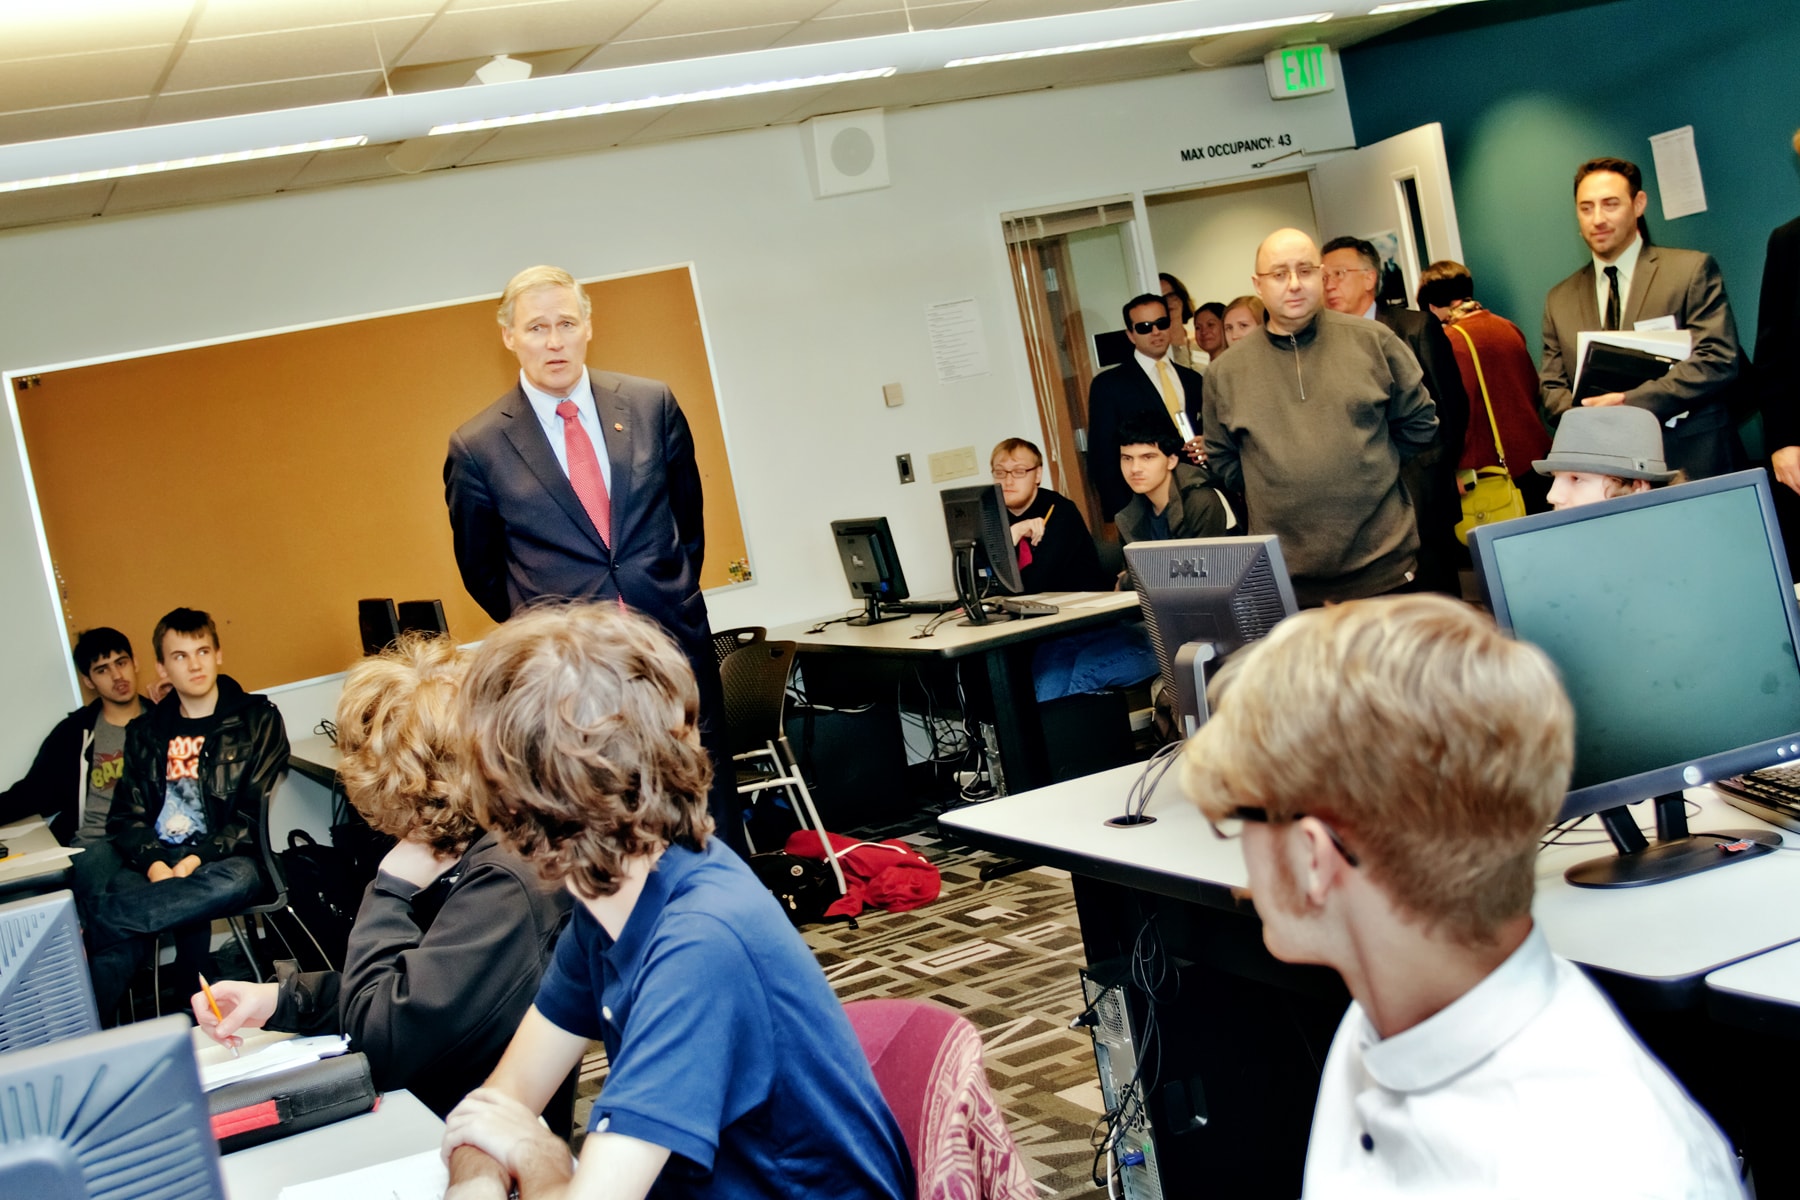 Governor Jay Inslee and Claude Comair speaking to DigiPen WaNIC students